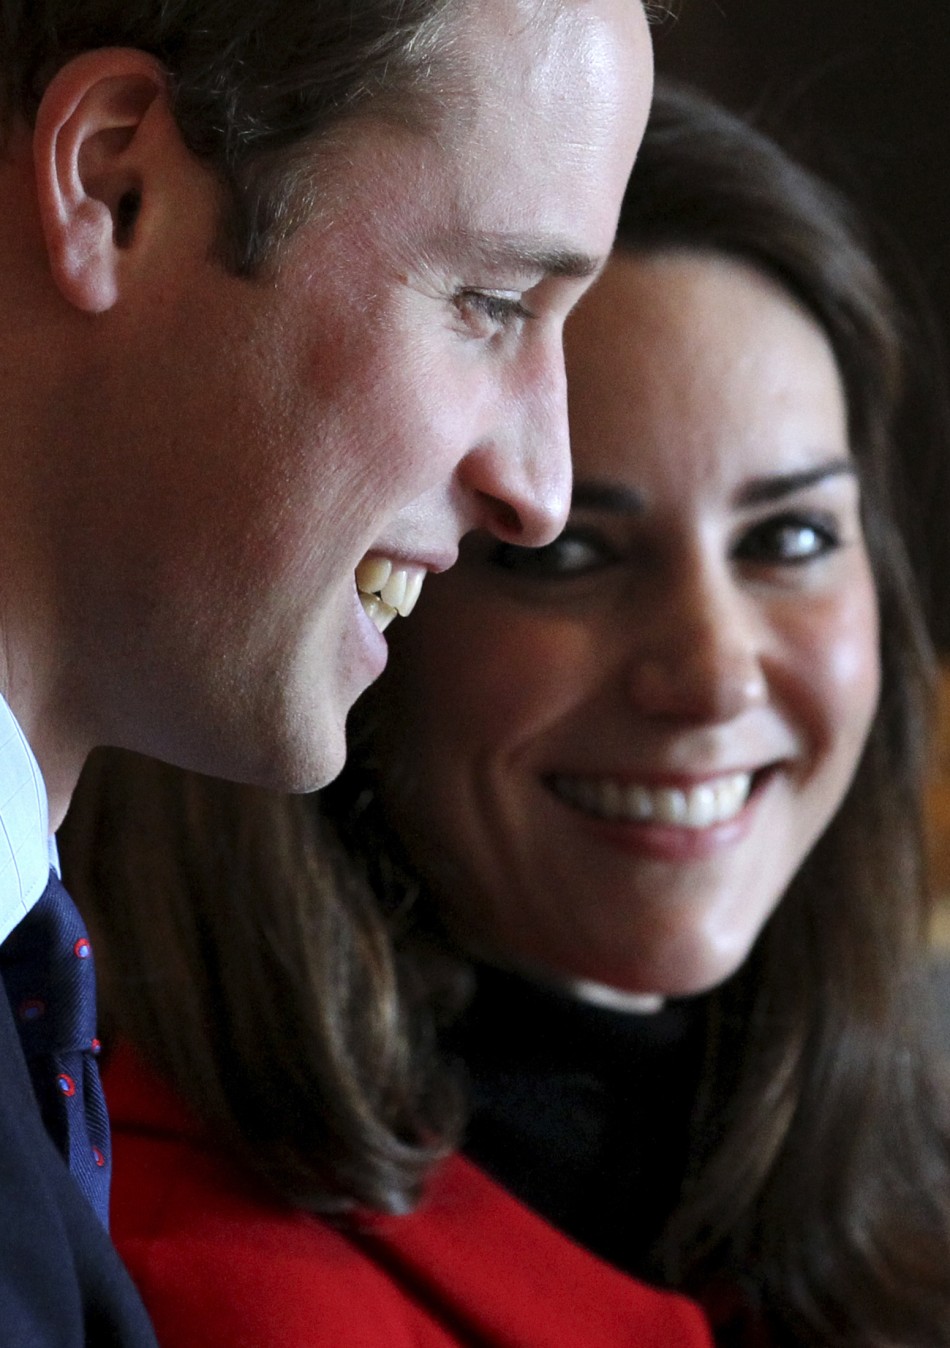 Kate Middleton and Prince William.